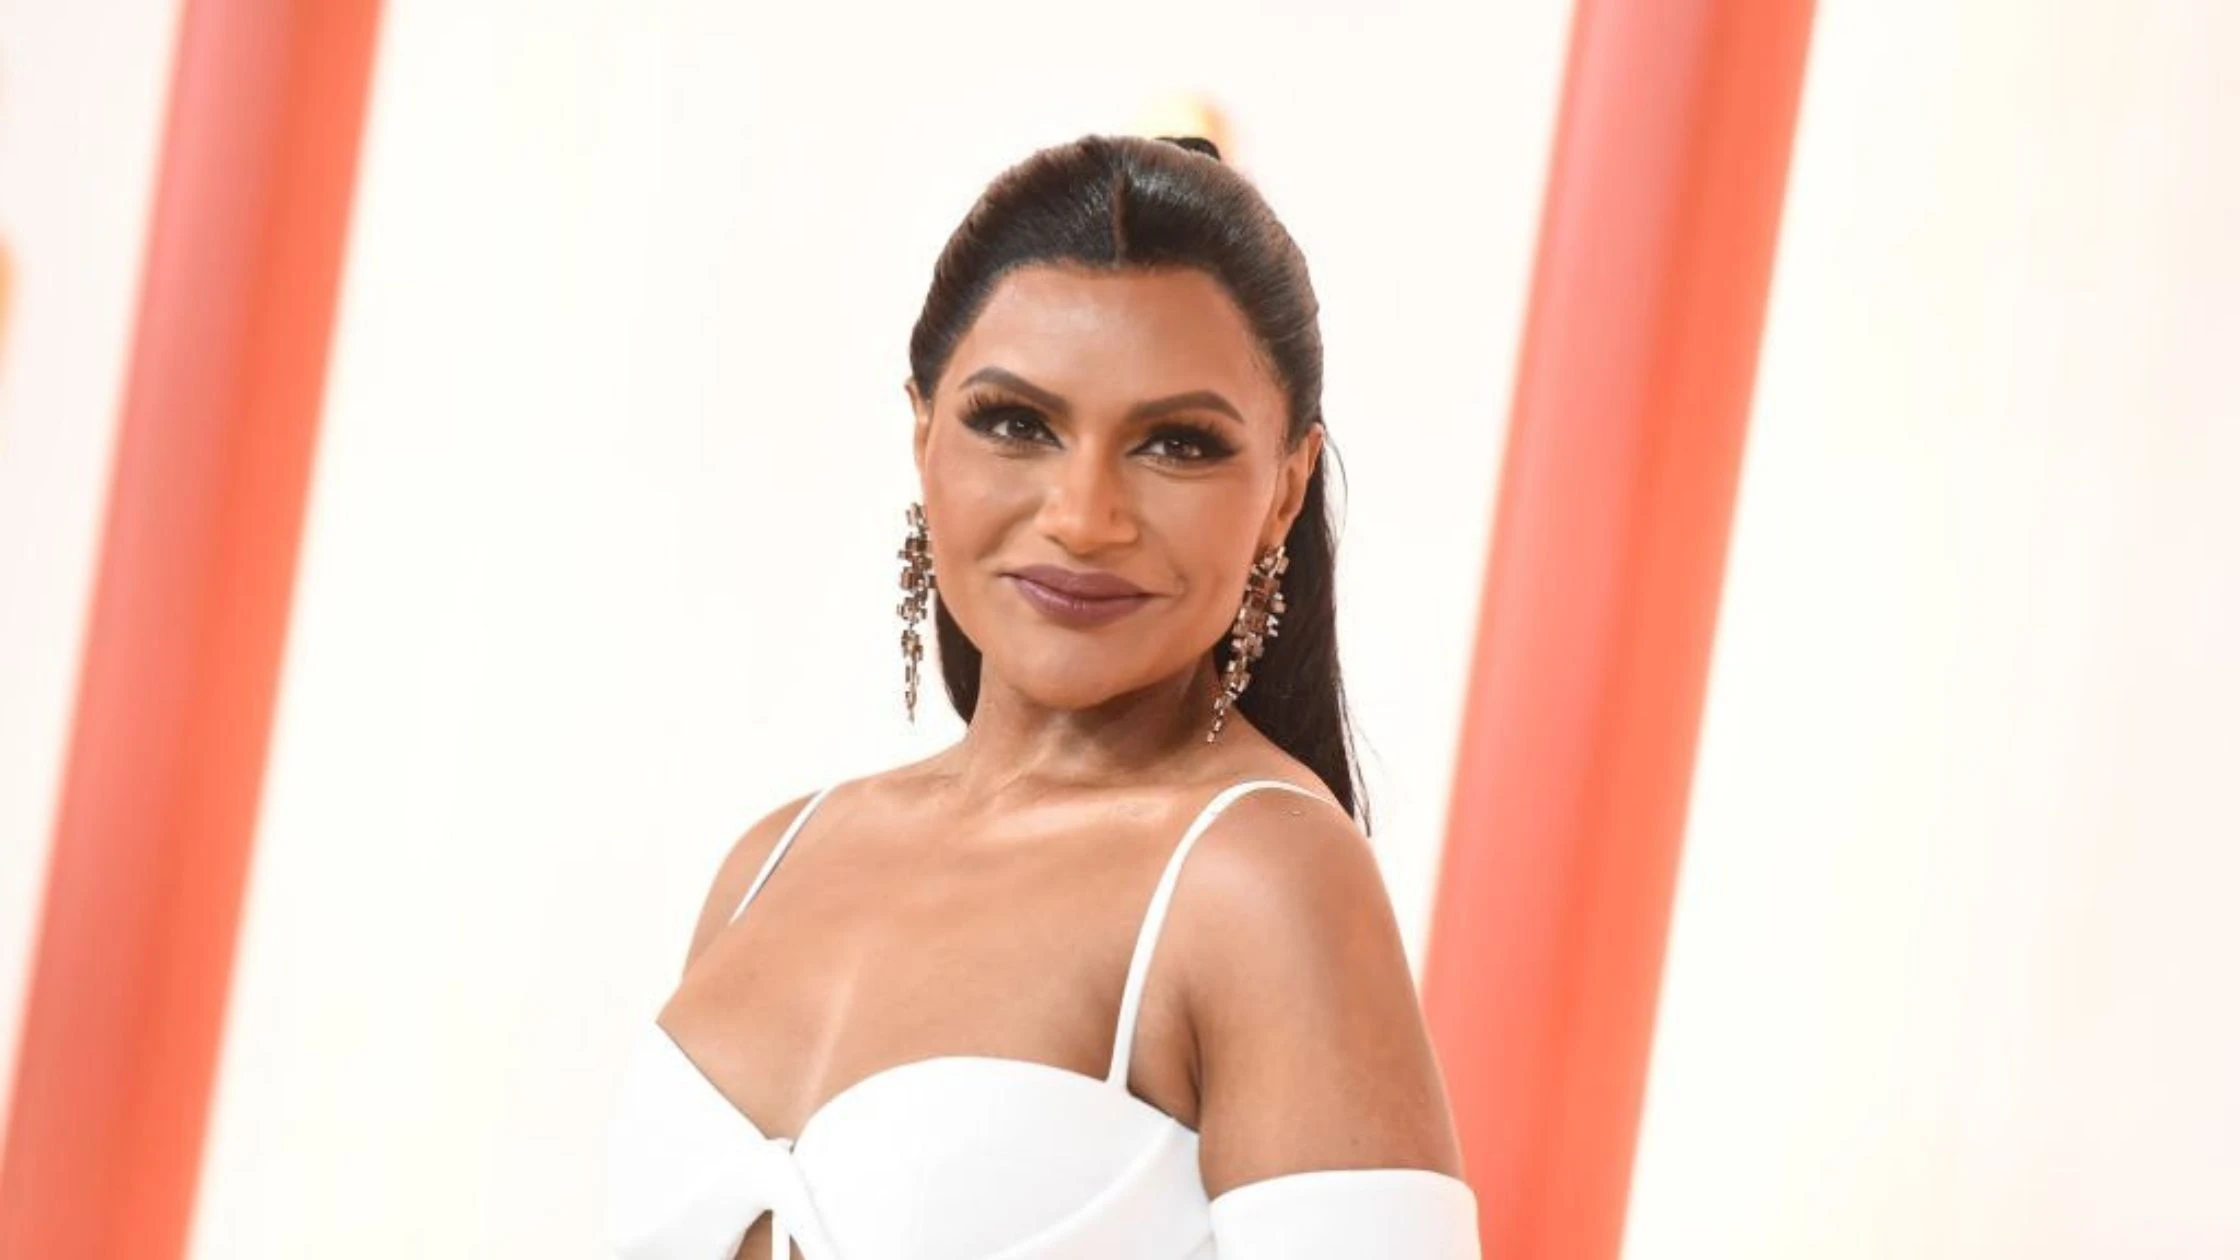 Mindy Kaling Flaunts Her Impressive Weight Loss In White Gown At The Oscars